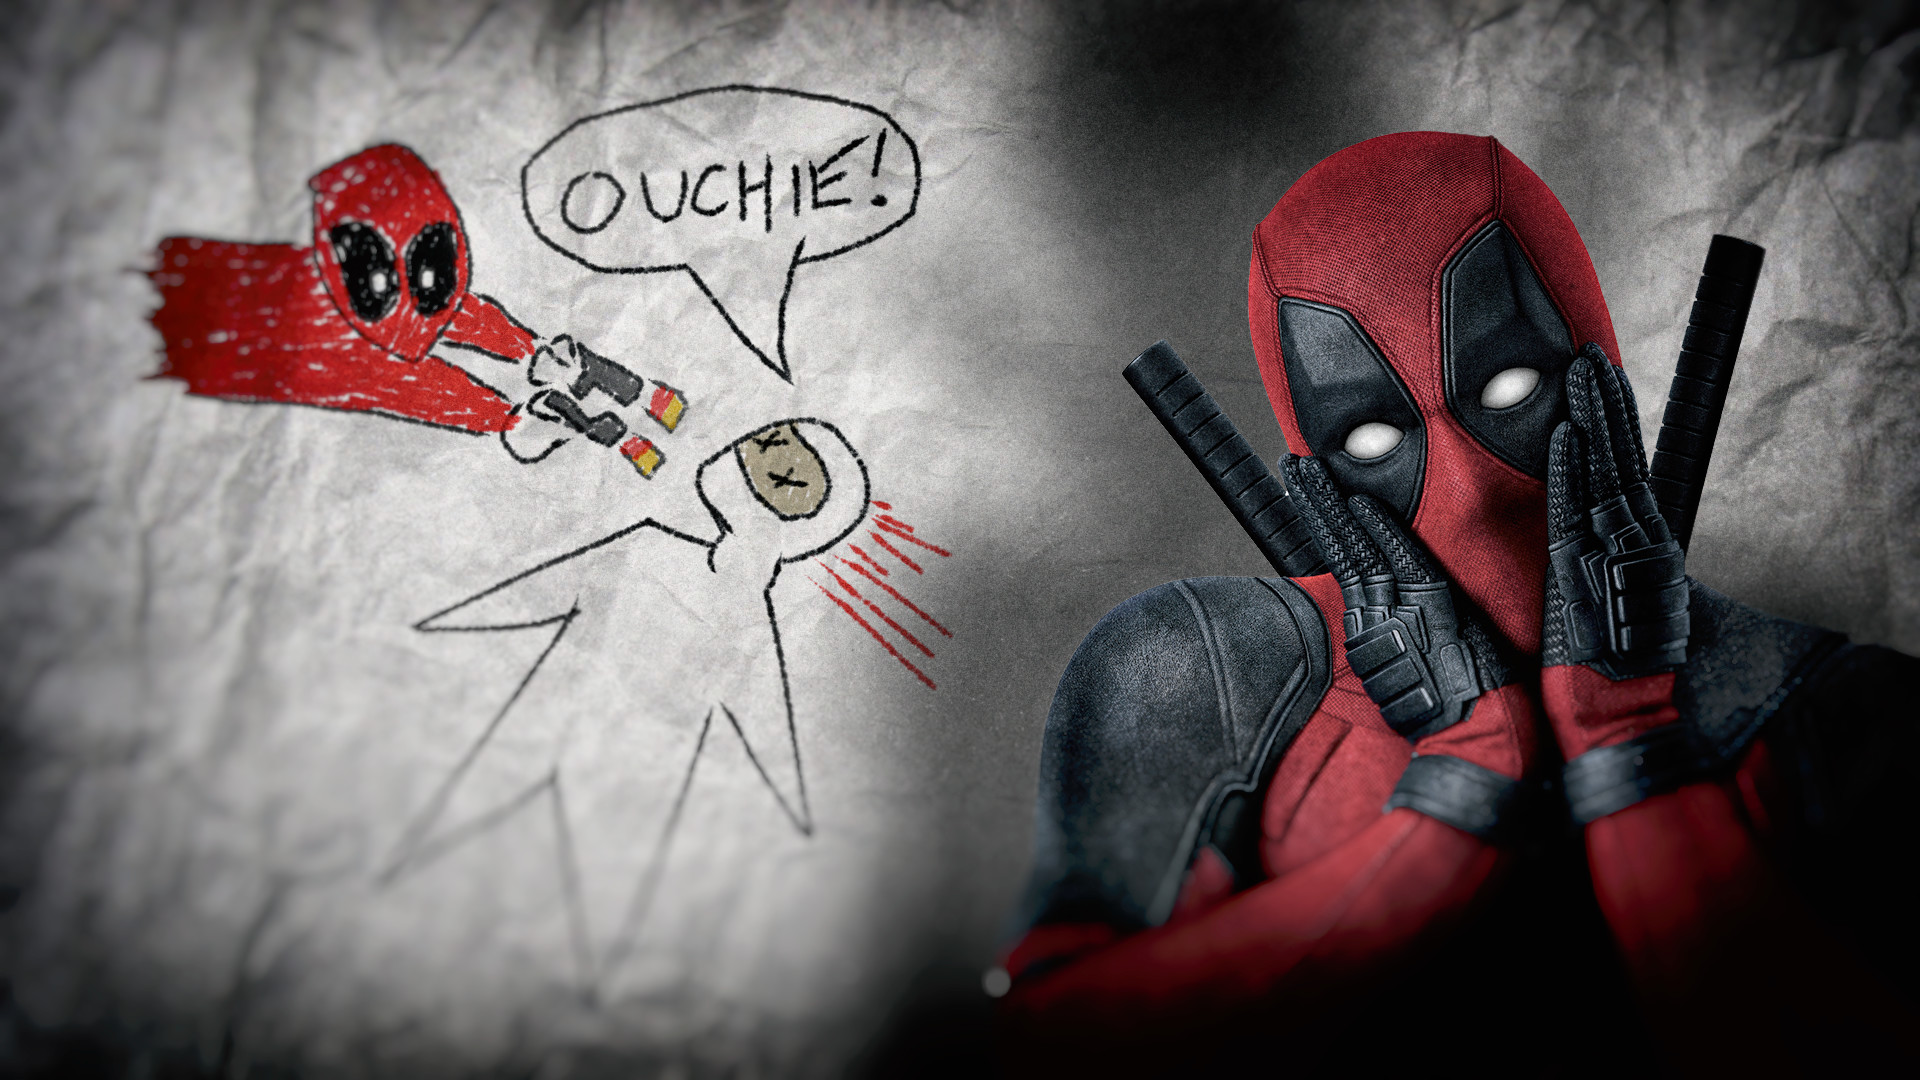 1920x1080 ... DEADPOOL MOVIE Wallpaper (Ouchie Drawing) by paintpot2